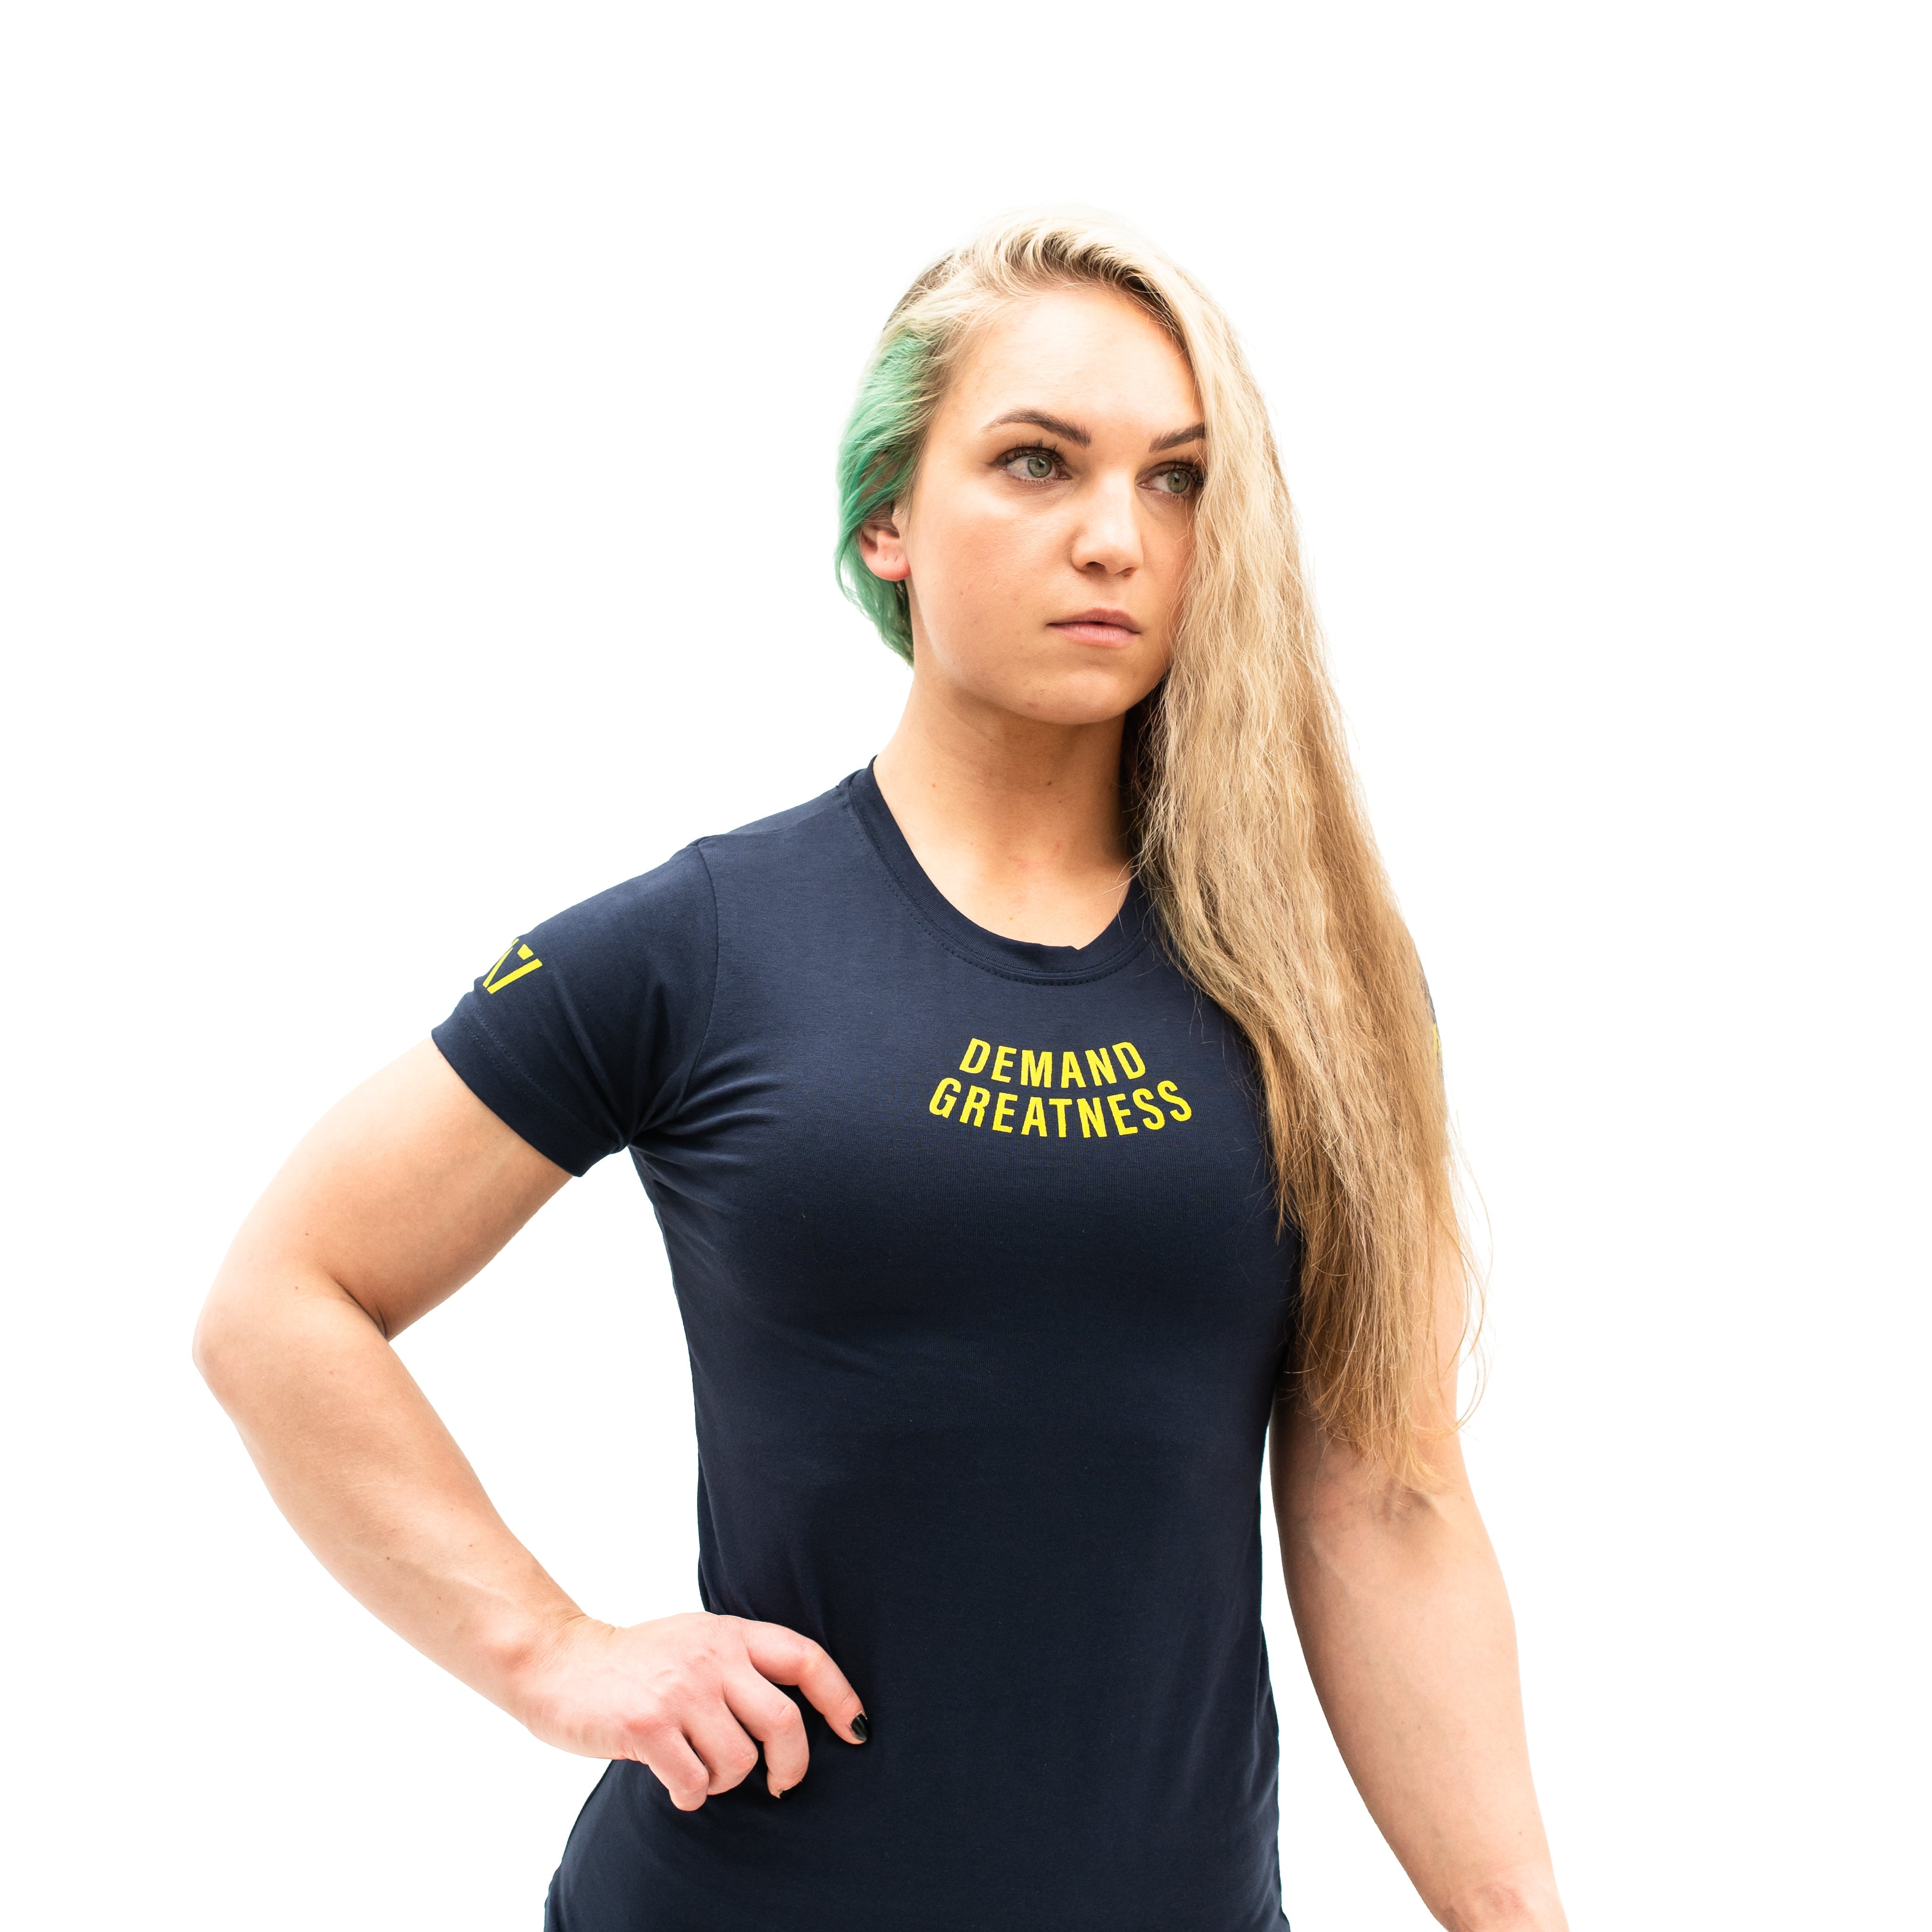 Standout from the crowd in our Electric Lemonade Demand Greatness Meet Shirt and let your energy show on the platform, in your training or while out and about. Our Meet tees offer a level of comfort like no other through their unique blend of materials and stretch in the places you desire for a comfortable fit that keeps your mind on your performance. A great addition to your IPF Approved Kit.